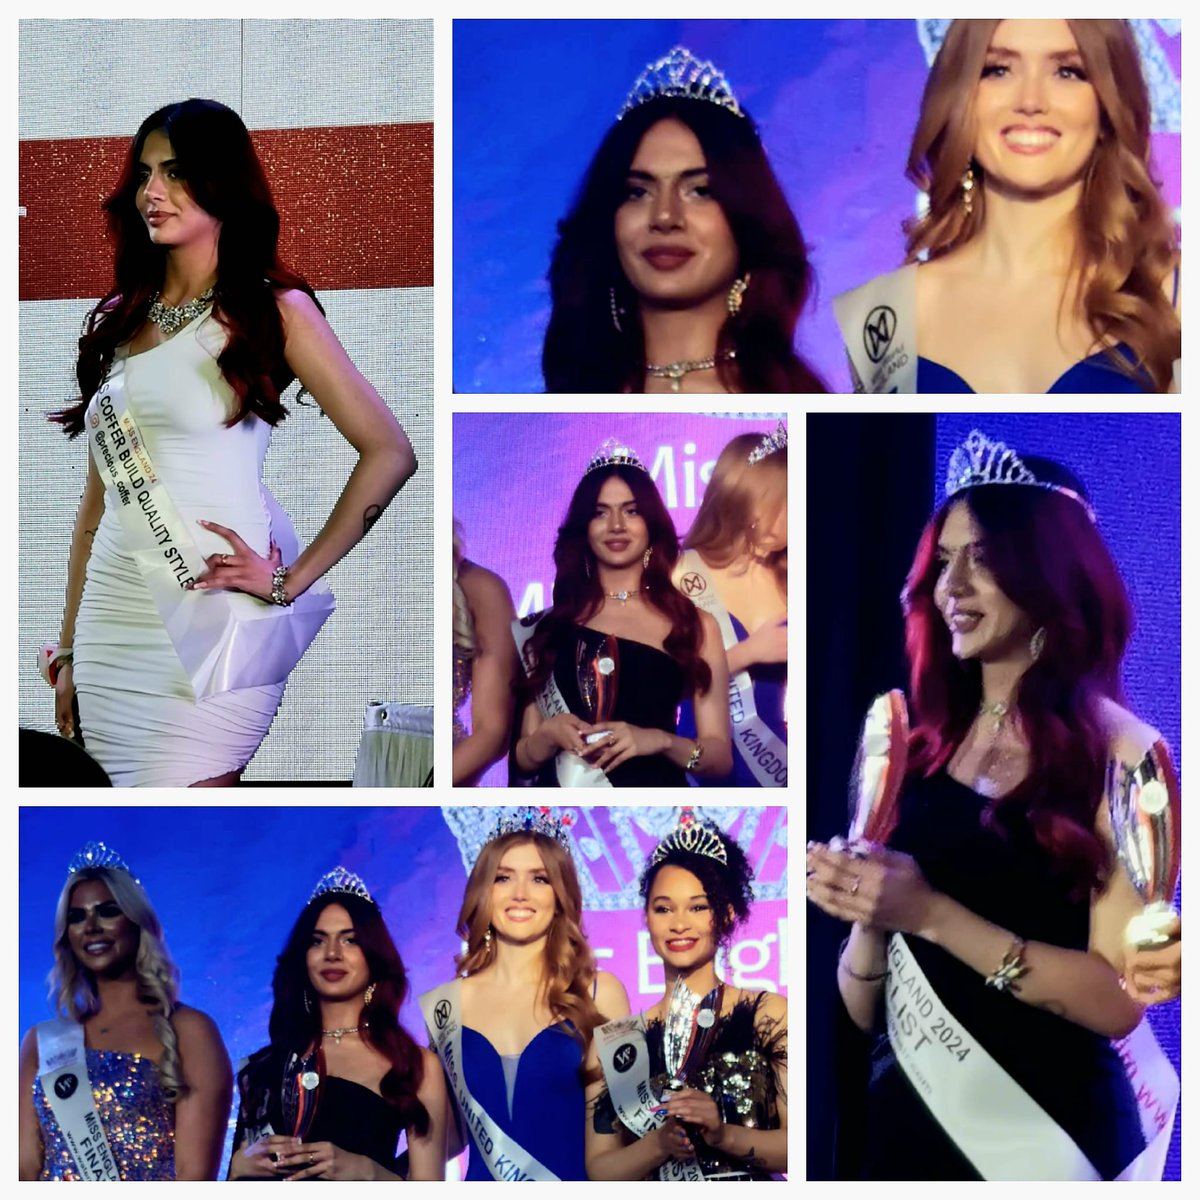 British-Indian #MehakChandel advances to Ms. England Finals. Criminology grad, model, and advocate for inclusivity. Balances modeling with aiding SEND children.

Read more on shorts91.com/category/india…

#MsEngland #InclusiveModeling #CriminologyGrad #Advocate #BritishIndian